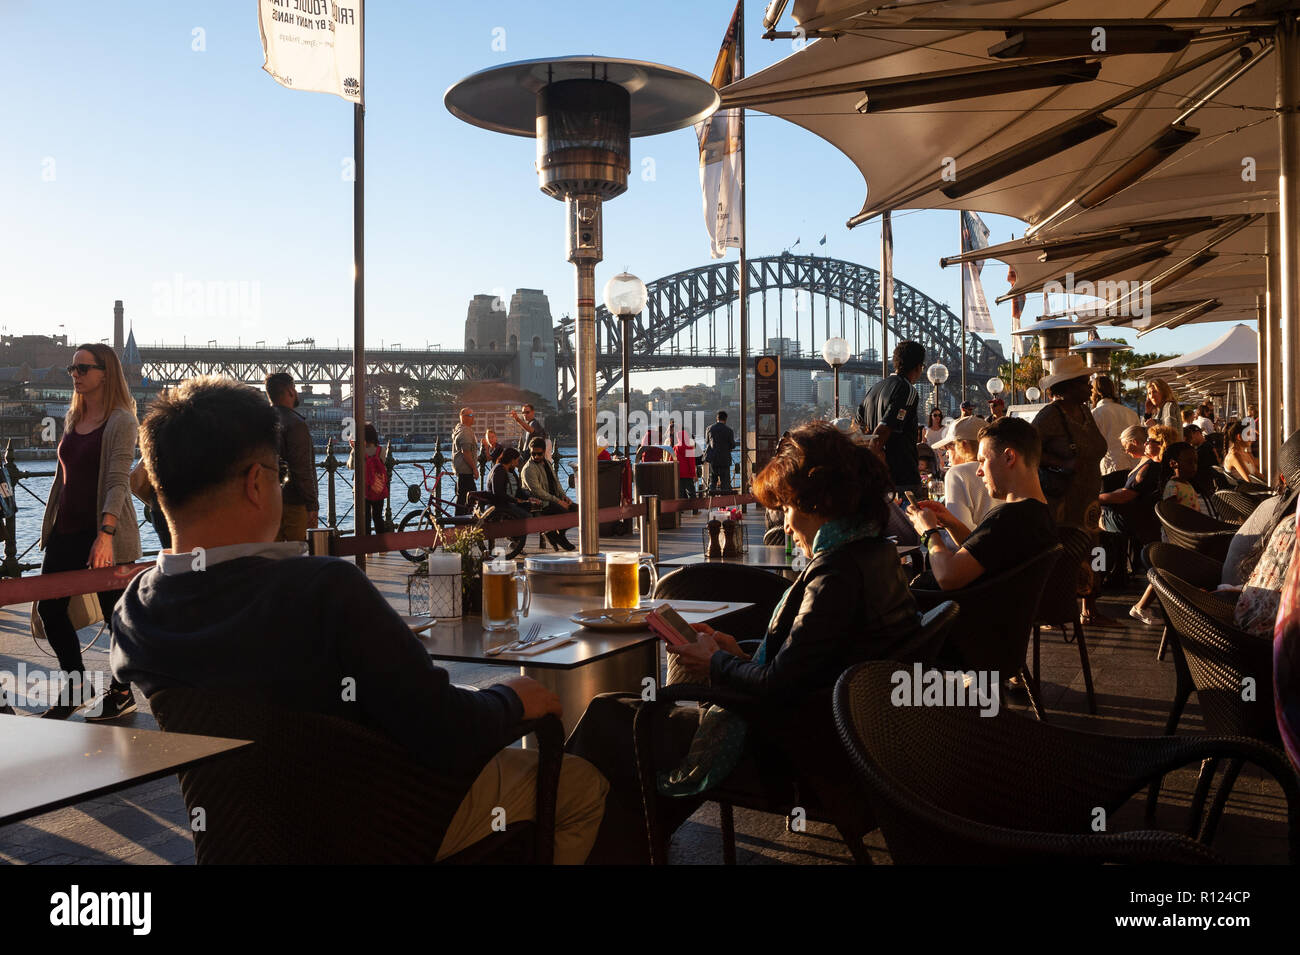 06.05.2018, Sydney, New South Wales, Australia - People are sitting in a restaurant along Circular Quay with the Sydney Harbour Bridge in the backdrop Stock Photo